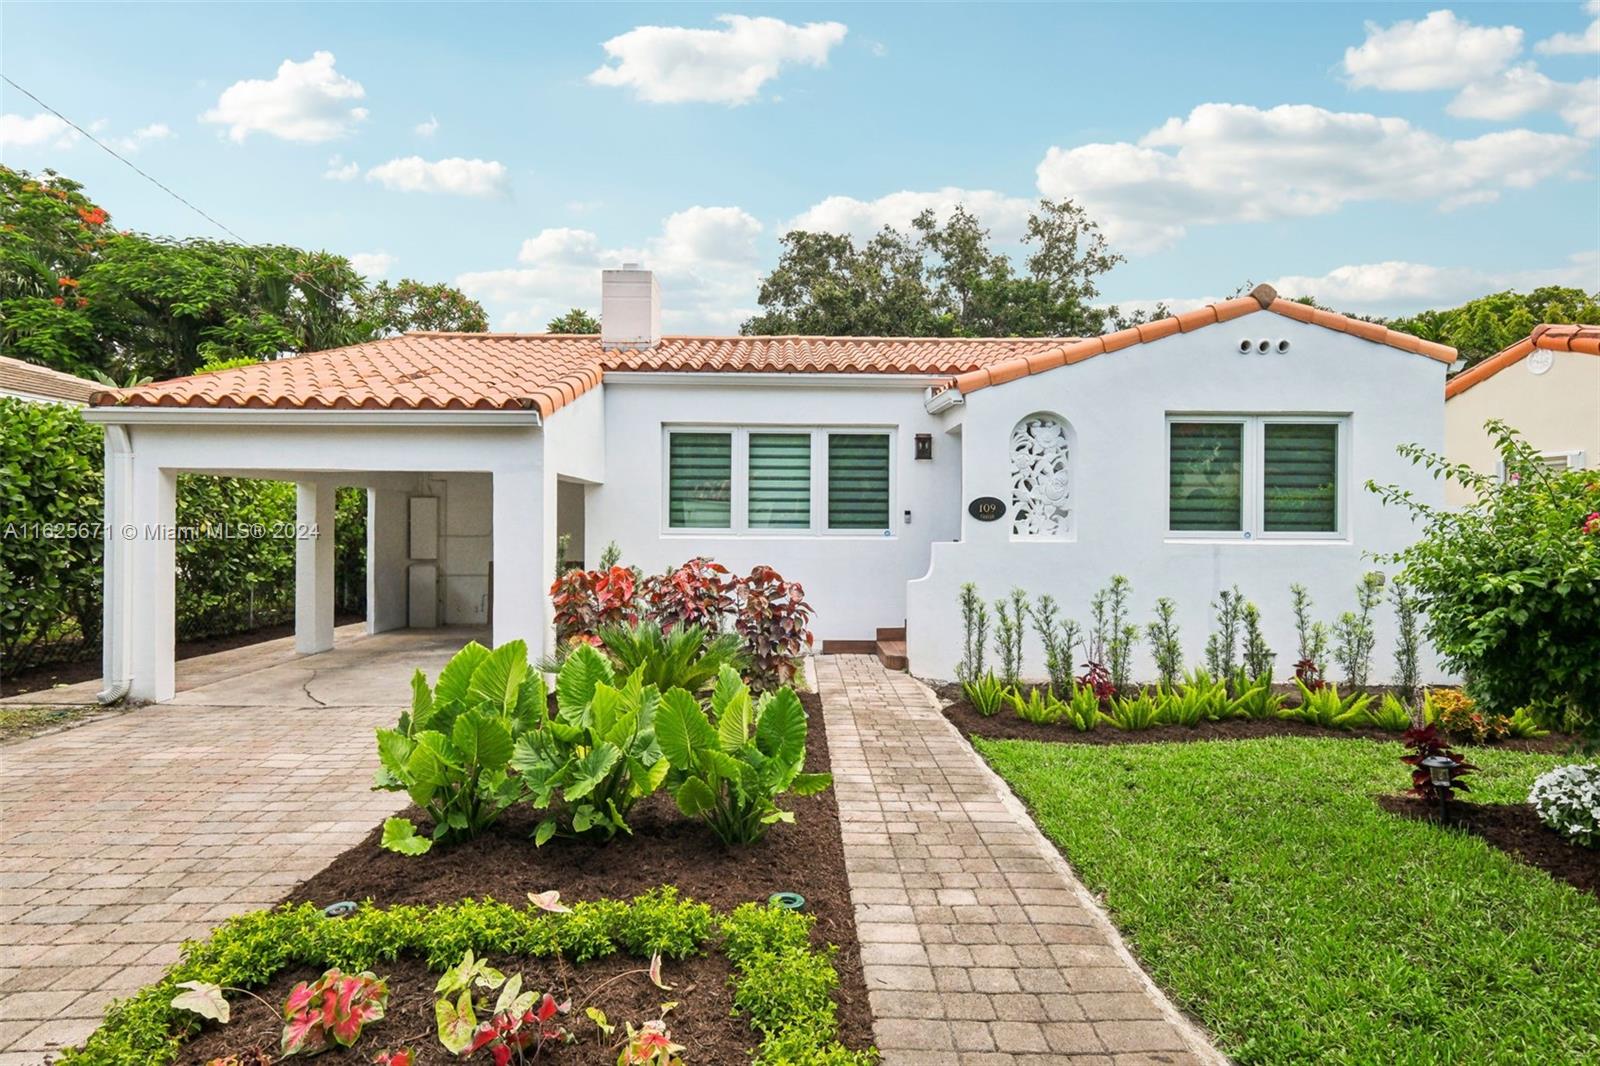 Discover the elegance of this mid-century style single-family home in Coral Gables. This beautifully maintained residence features updated appliances, a brand-new bathroom, new impact windows throughout, and over 1,300 square feet of space thoughtfully designed for both comfort and style. The original fireplace and hardwood floors provide a cozy, homey feel. The large Florida room, with numerous windows, offers abundant natural light and motorized rolling shades. Enjoy the sunrise from the east and the sunset in the afternoon. Nestled in one of Coral Gables' most desirable neighborhoods, this home offers both luxury and privacy. Don’t miss your chance to own this gem—schedule a showing today and step into the lifestyle you've always dreamed of!